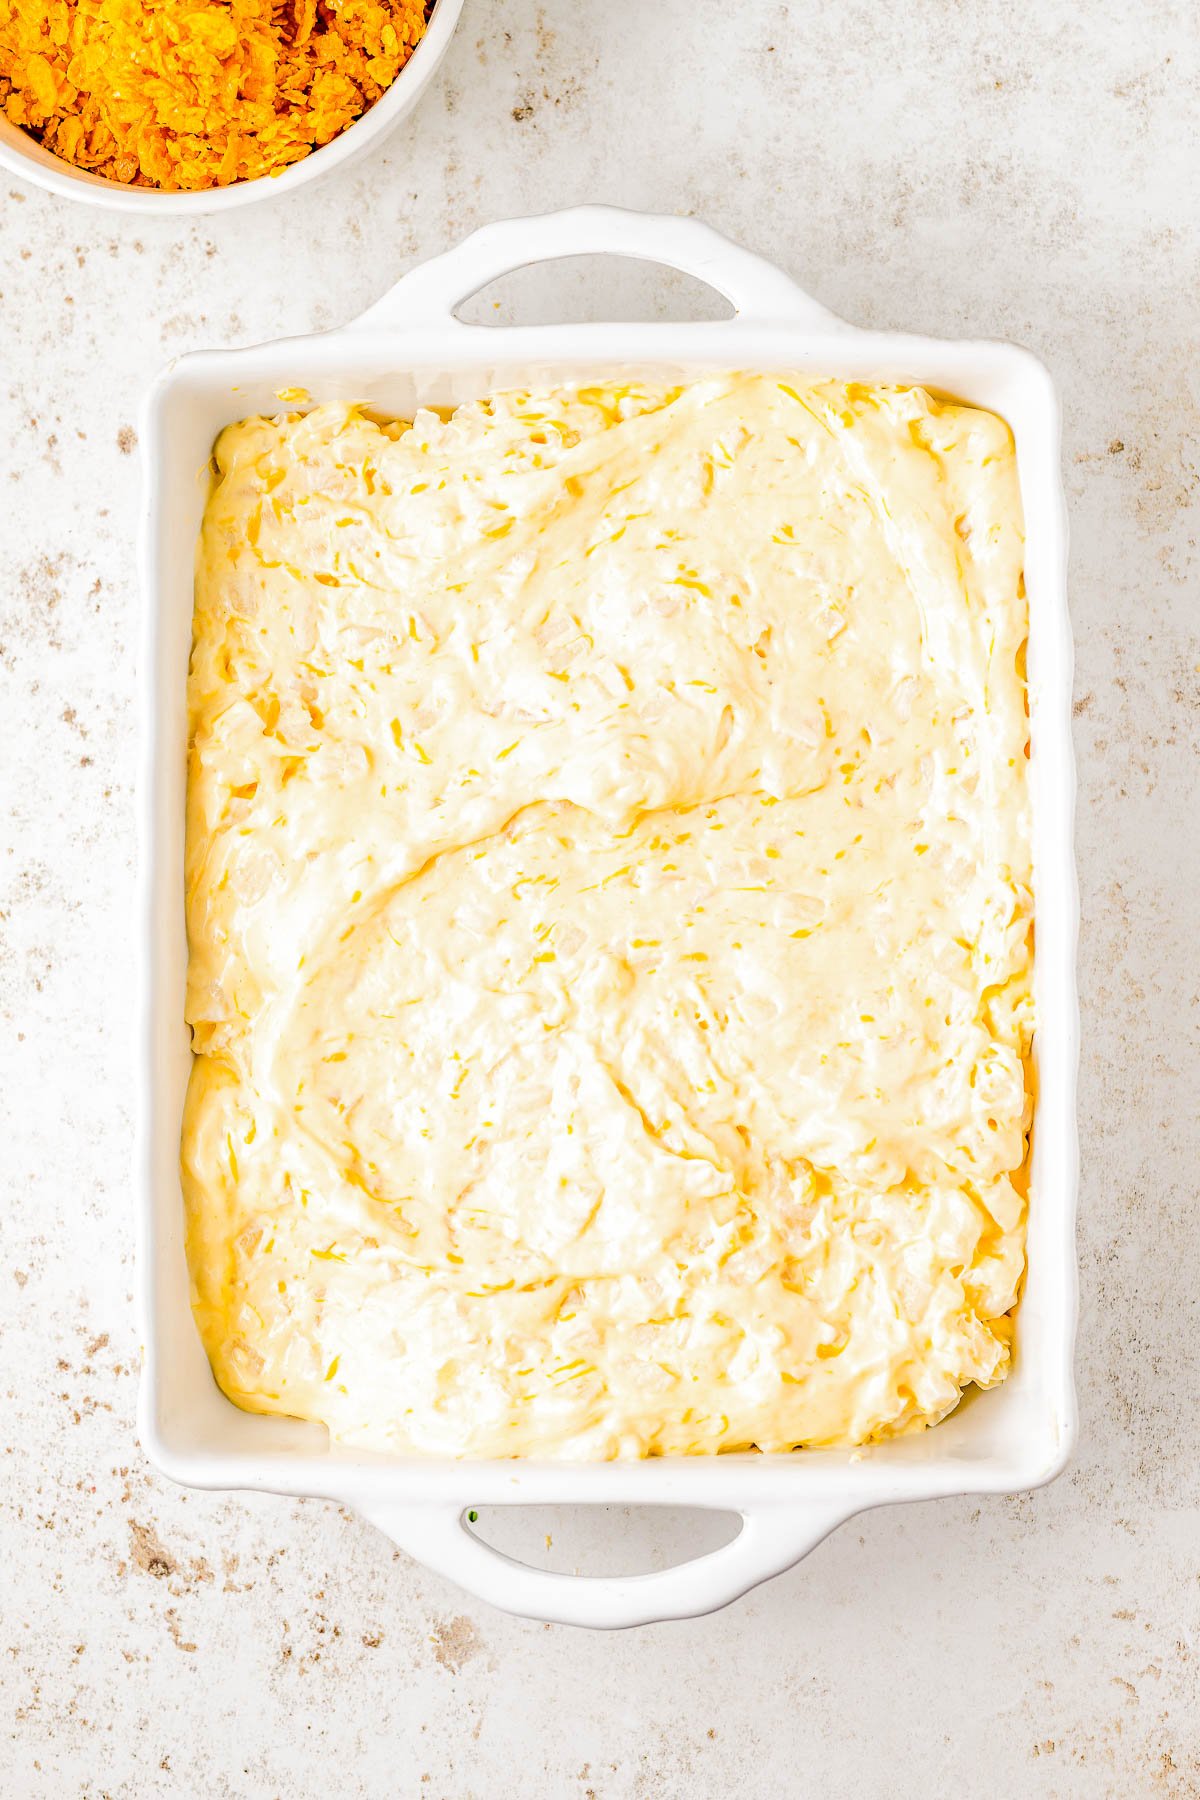 Cheesy Funeral Potatoes — This casserole is creamy, CHEESY, and topped with crunchy Corn Flakes! It’s an easy side dish that feeds a crowd, so it’s perfect for potlucks, holidays like Thanksgiving and Christmas, and family gatherings. Just 10 minutes of active prep time make this one of the EASIEST casseroles ever! No funeral luncheon required to enjoy this comfort food family favorite!